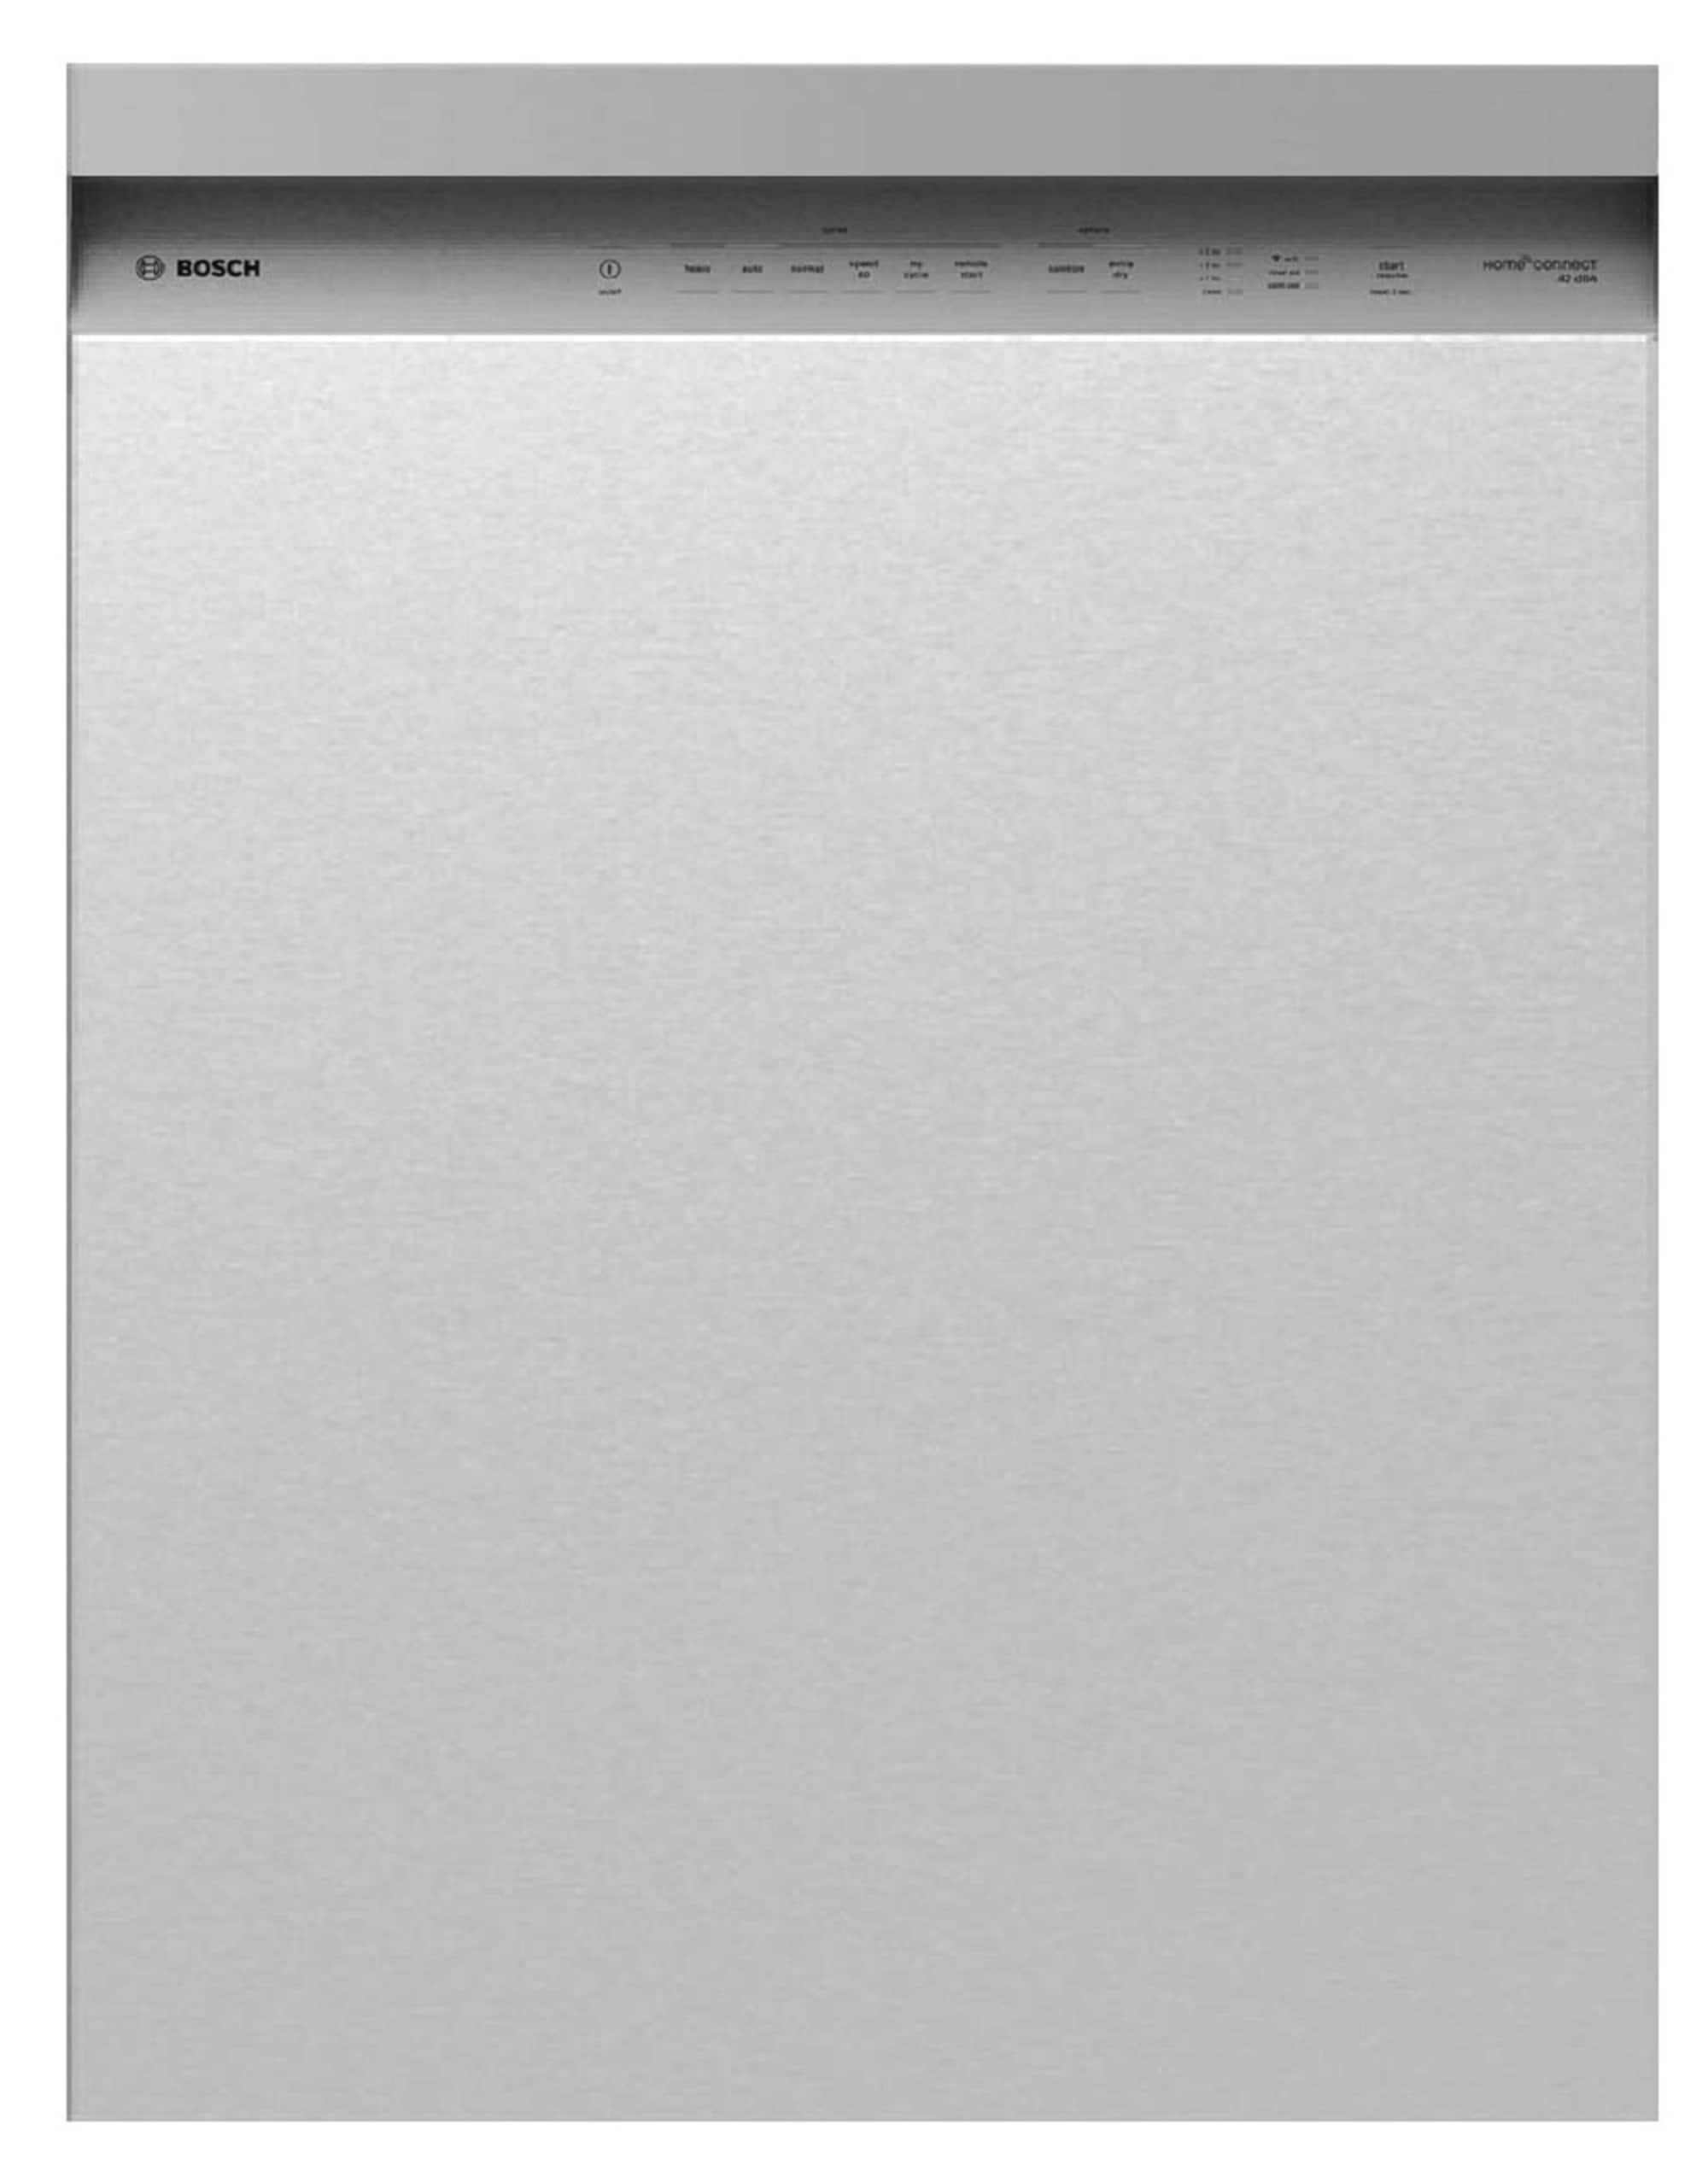 Bosch 300 Series Front Control 24-in Smart Built-In Dishwasher